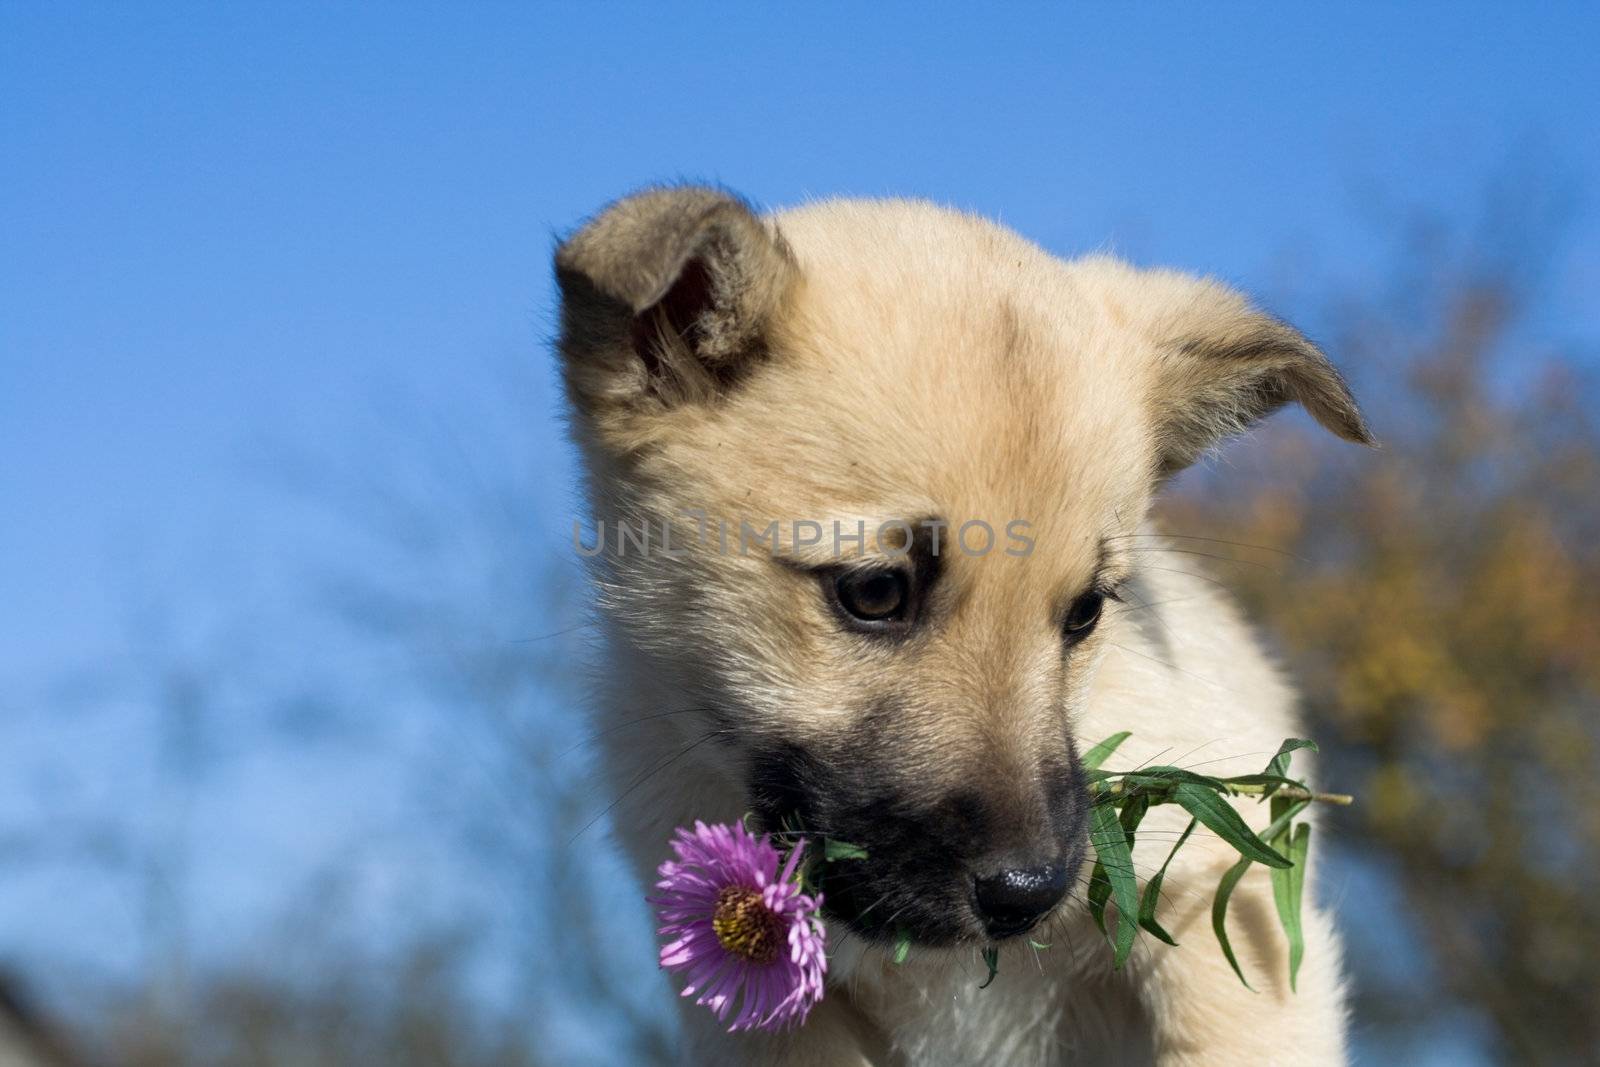 puppy dog hold flower in mouth 1 by Alekcey